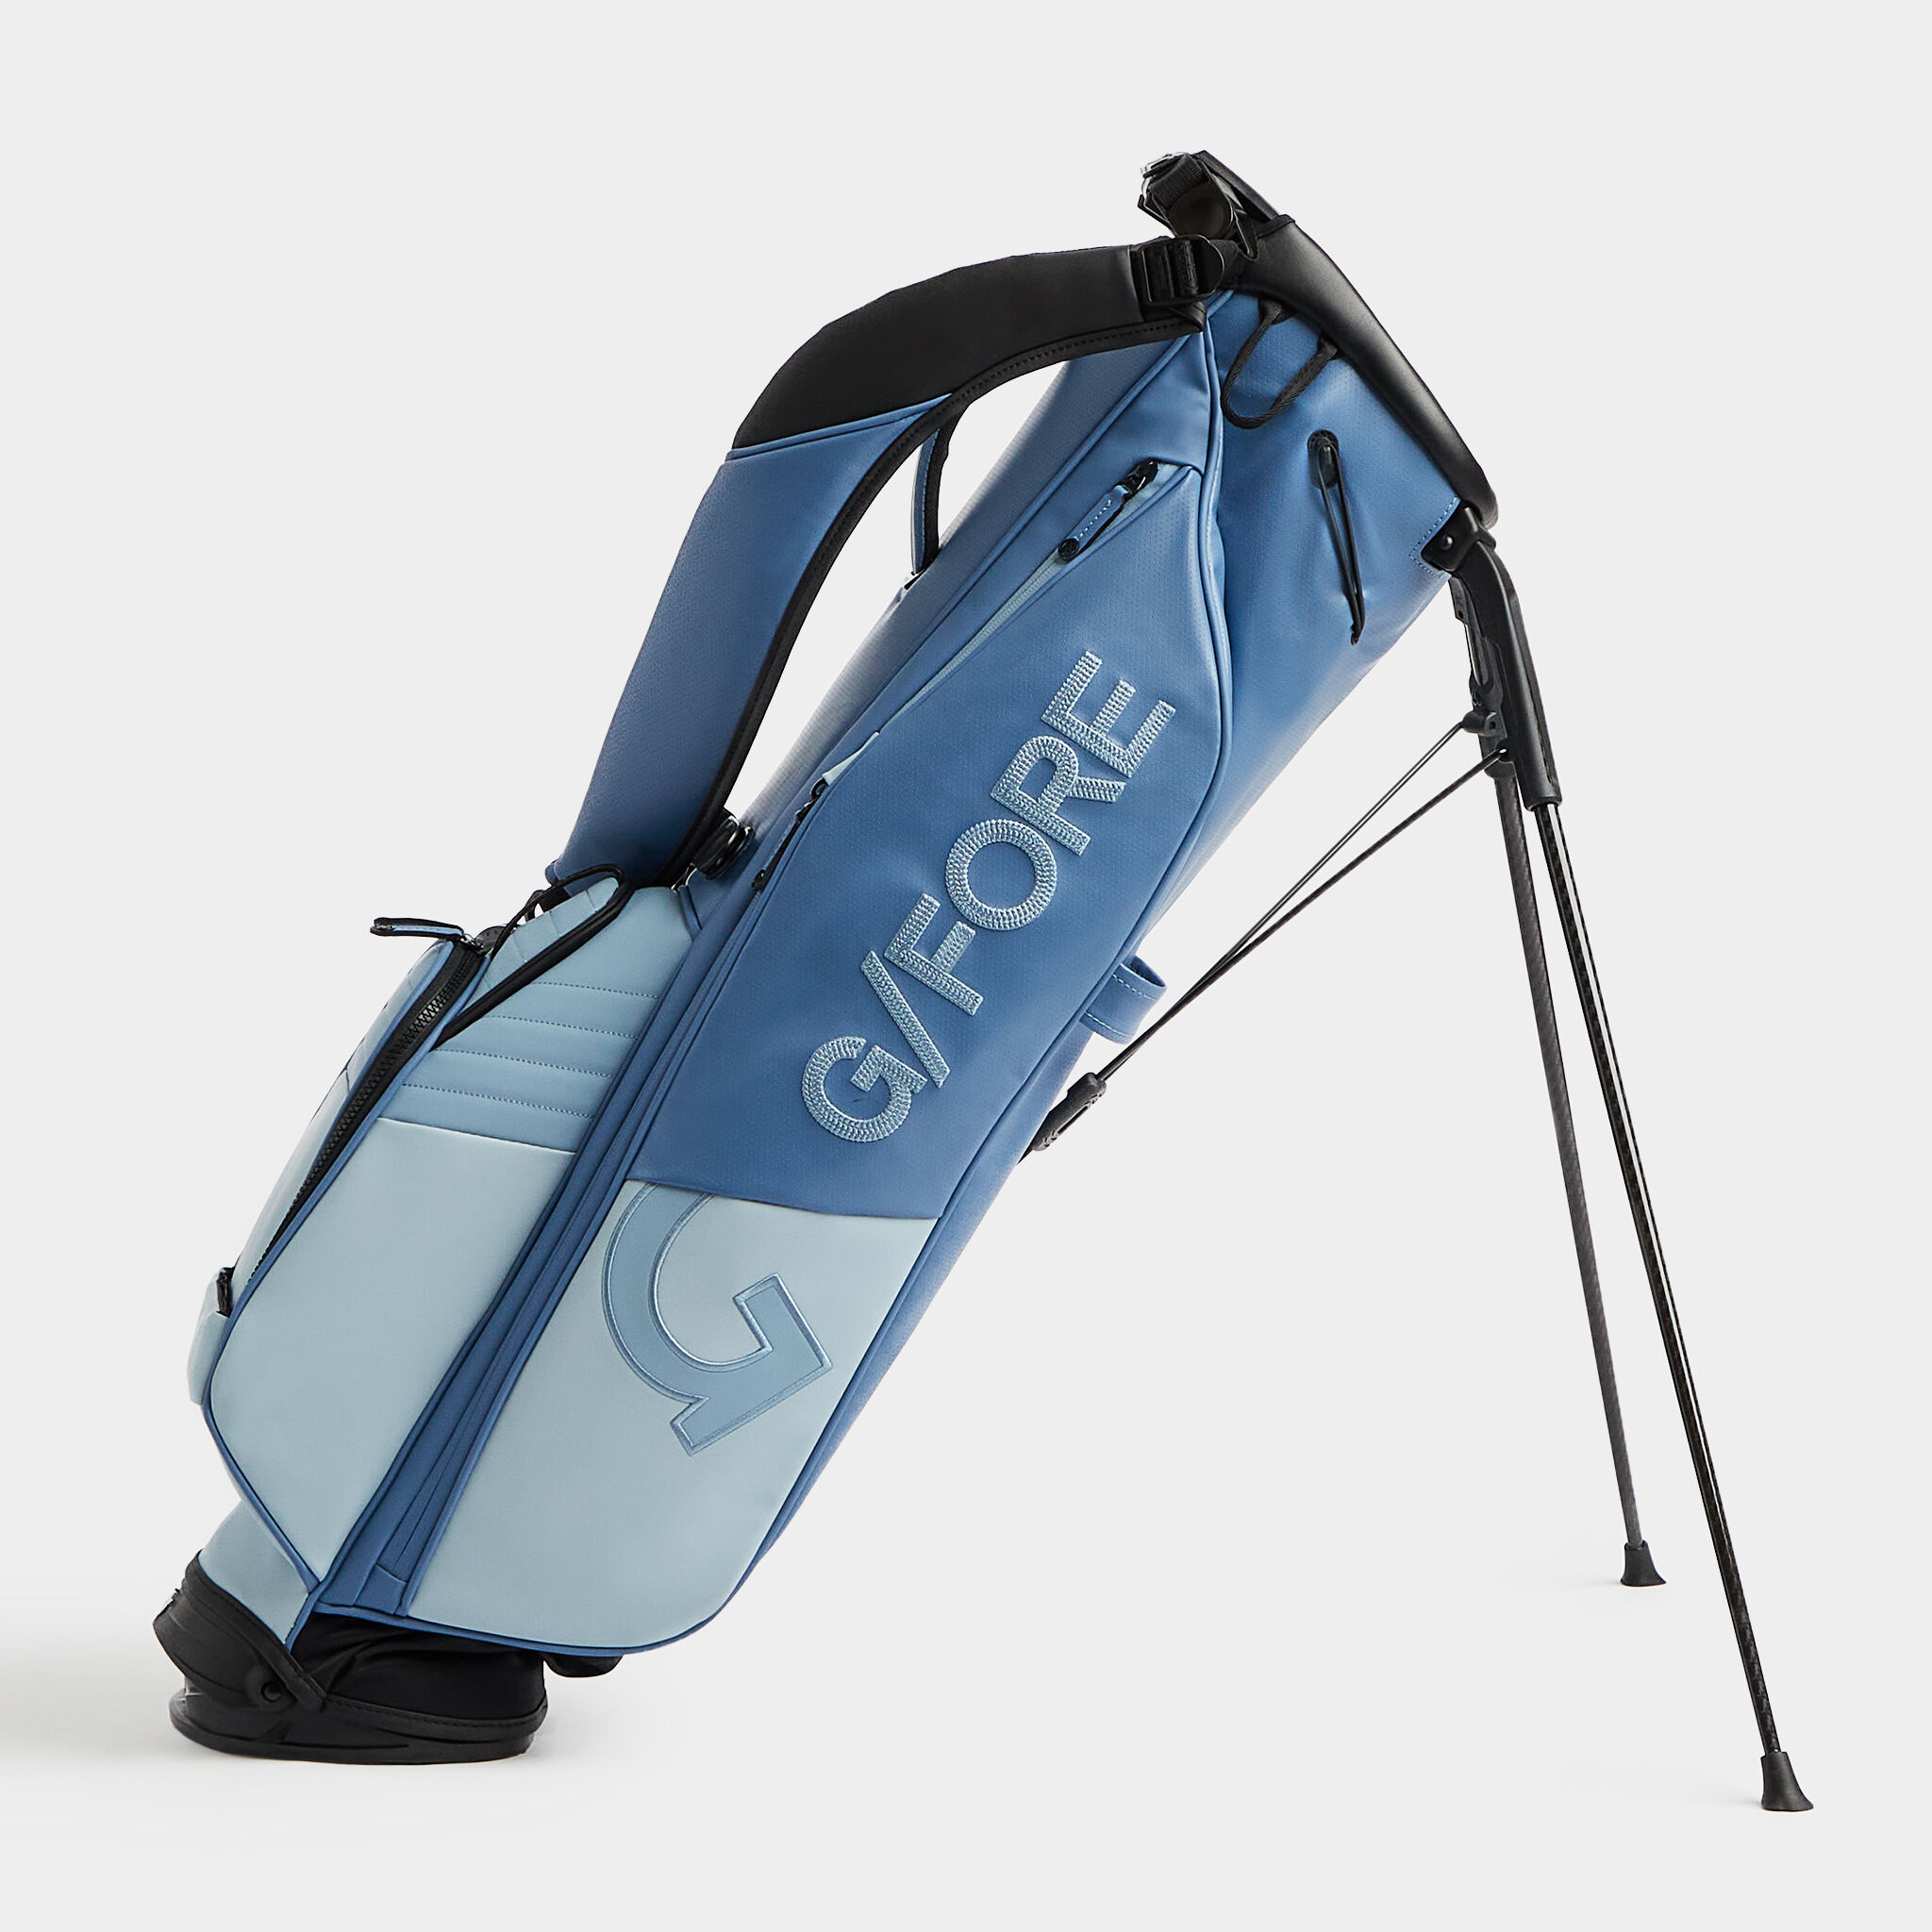 SUNDAY II CARRY GOLF BAG | GOLF BAGS FOR MEN AND